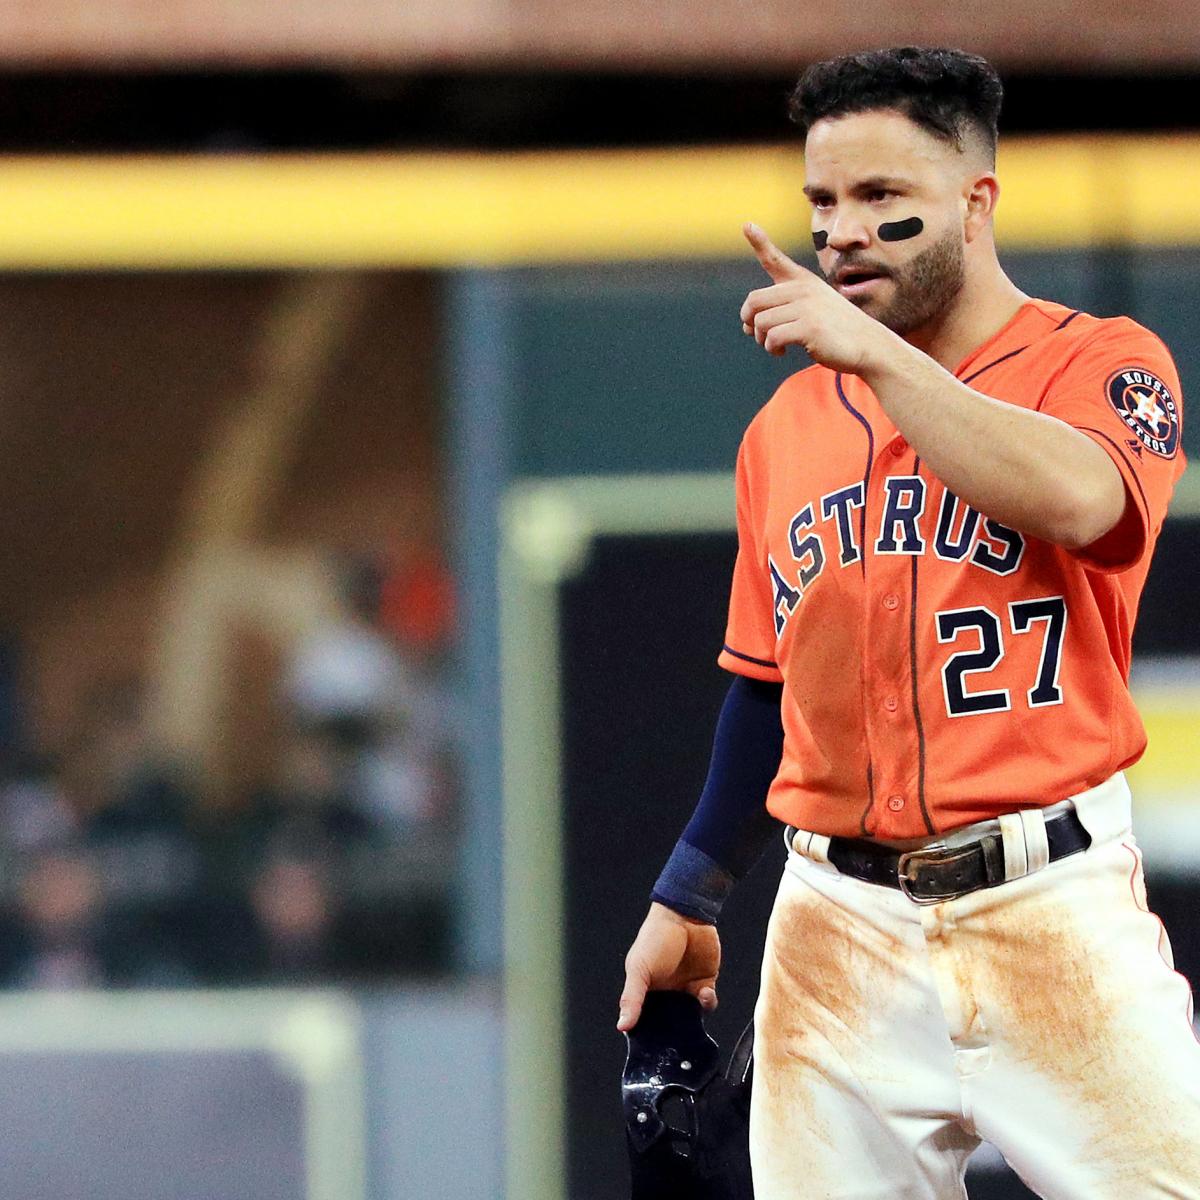 Astros' Jose Altuve Denies Wearing Electronic Device Amid Sign